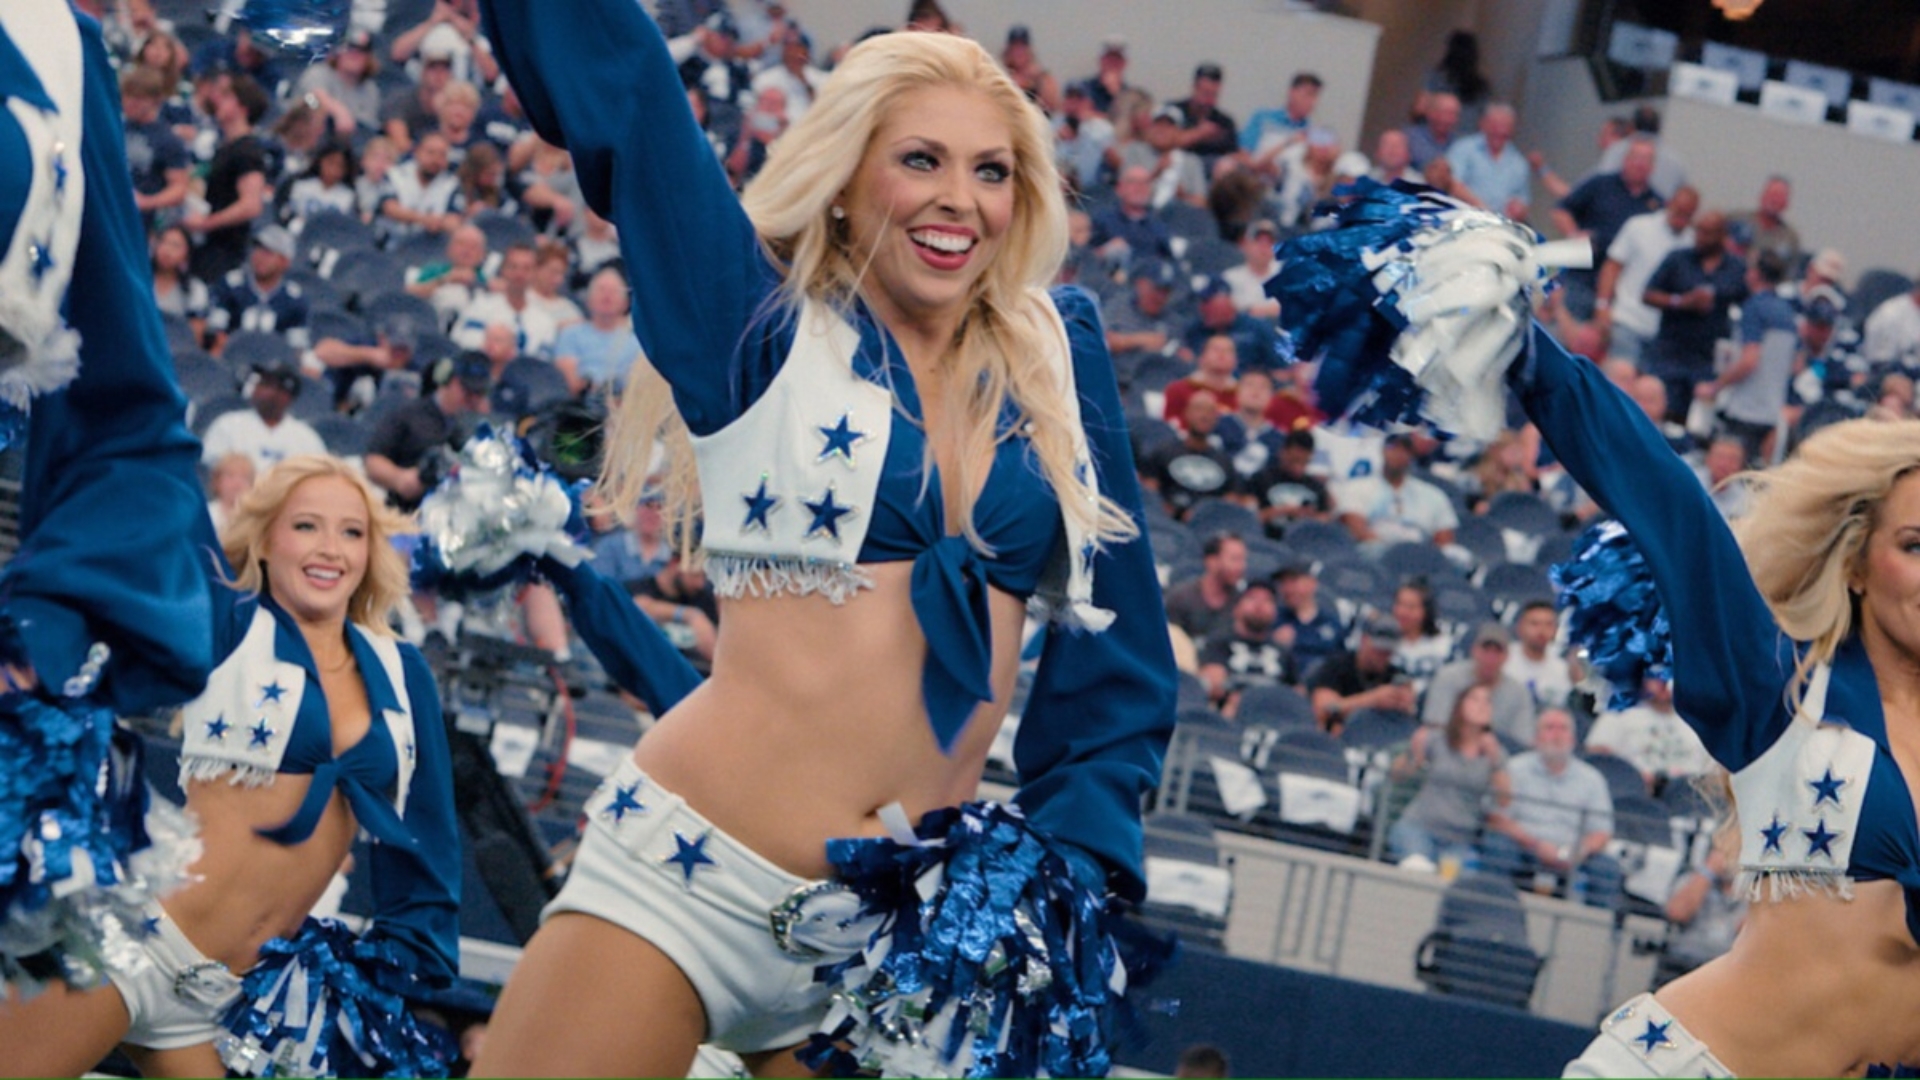 A blonde Dall cowboys cheerleader wears white shorts and a white and blue top, holding pom pons with a hand above her head and one on her hip